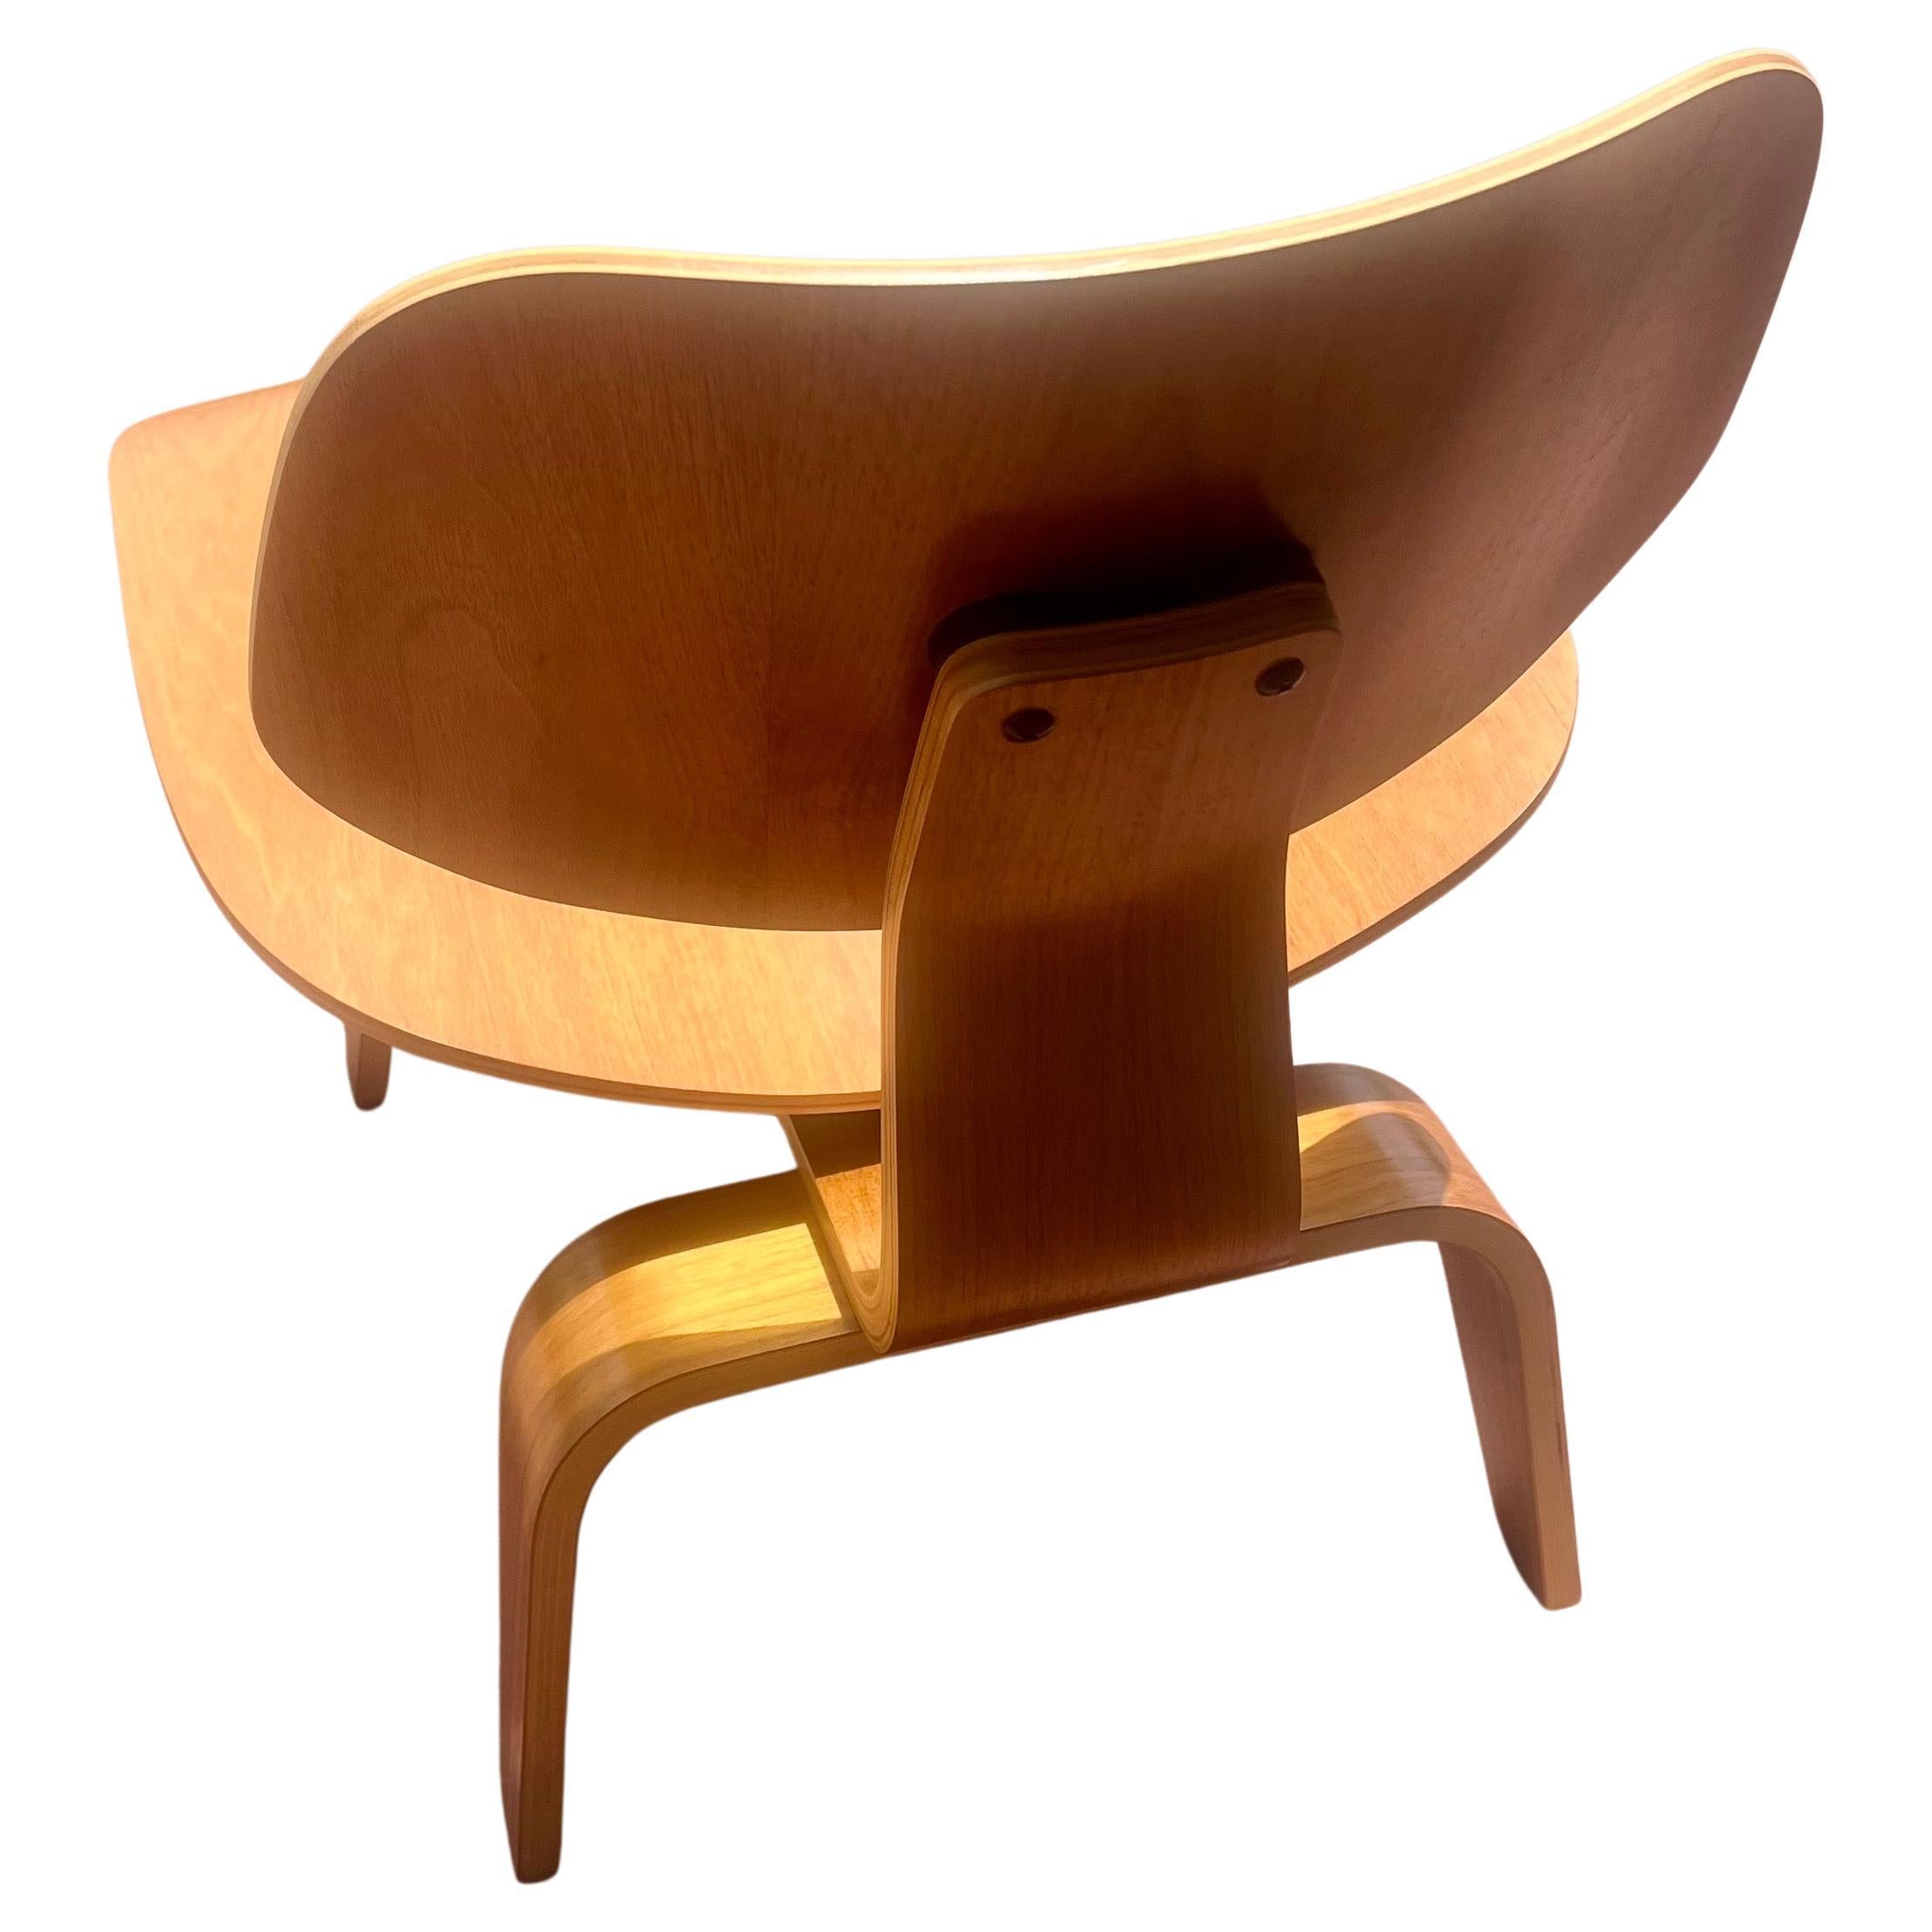 American Iconic Pair of LCW Chairs Designed by Charles Eames for Herman Miller